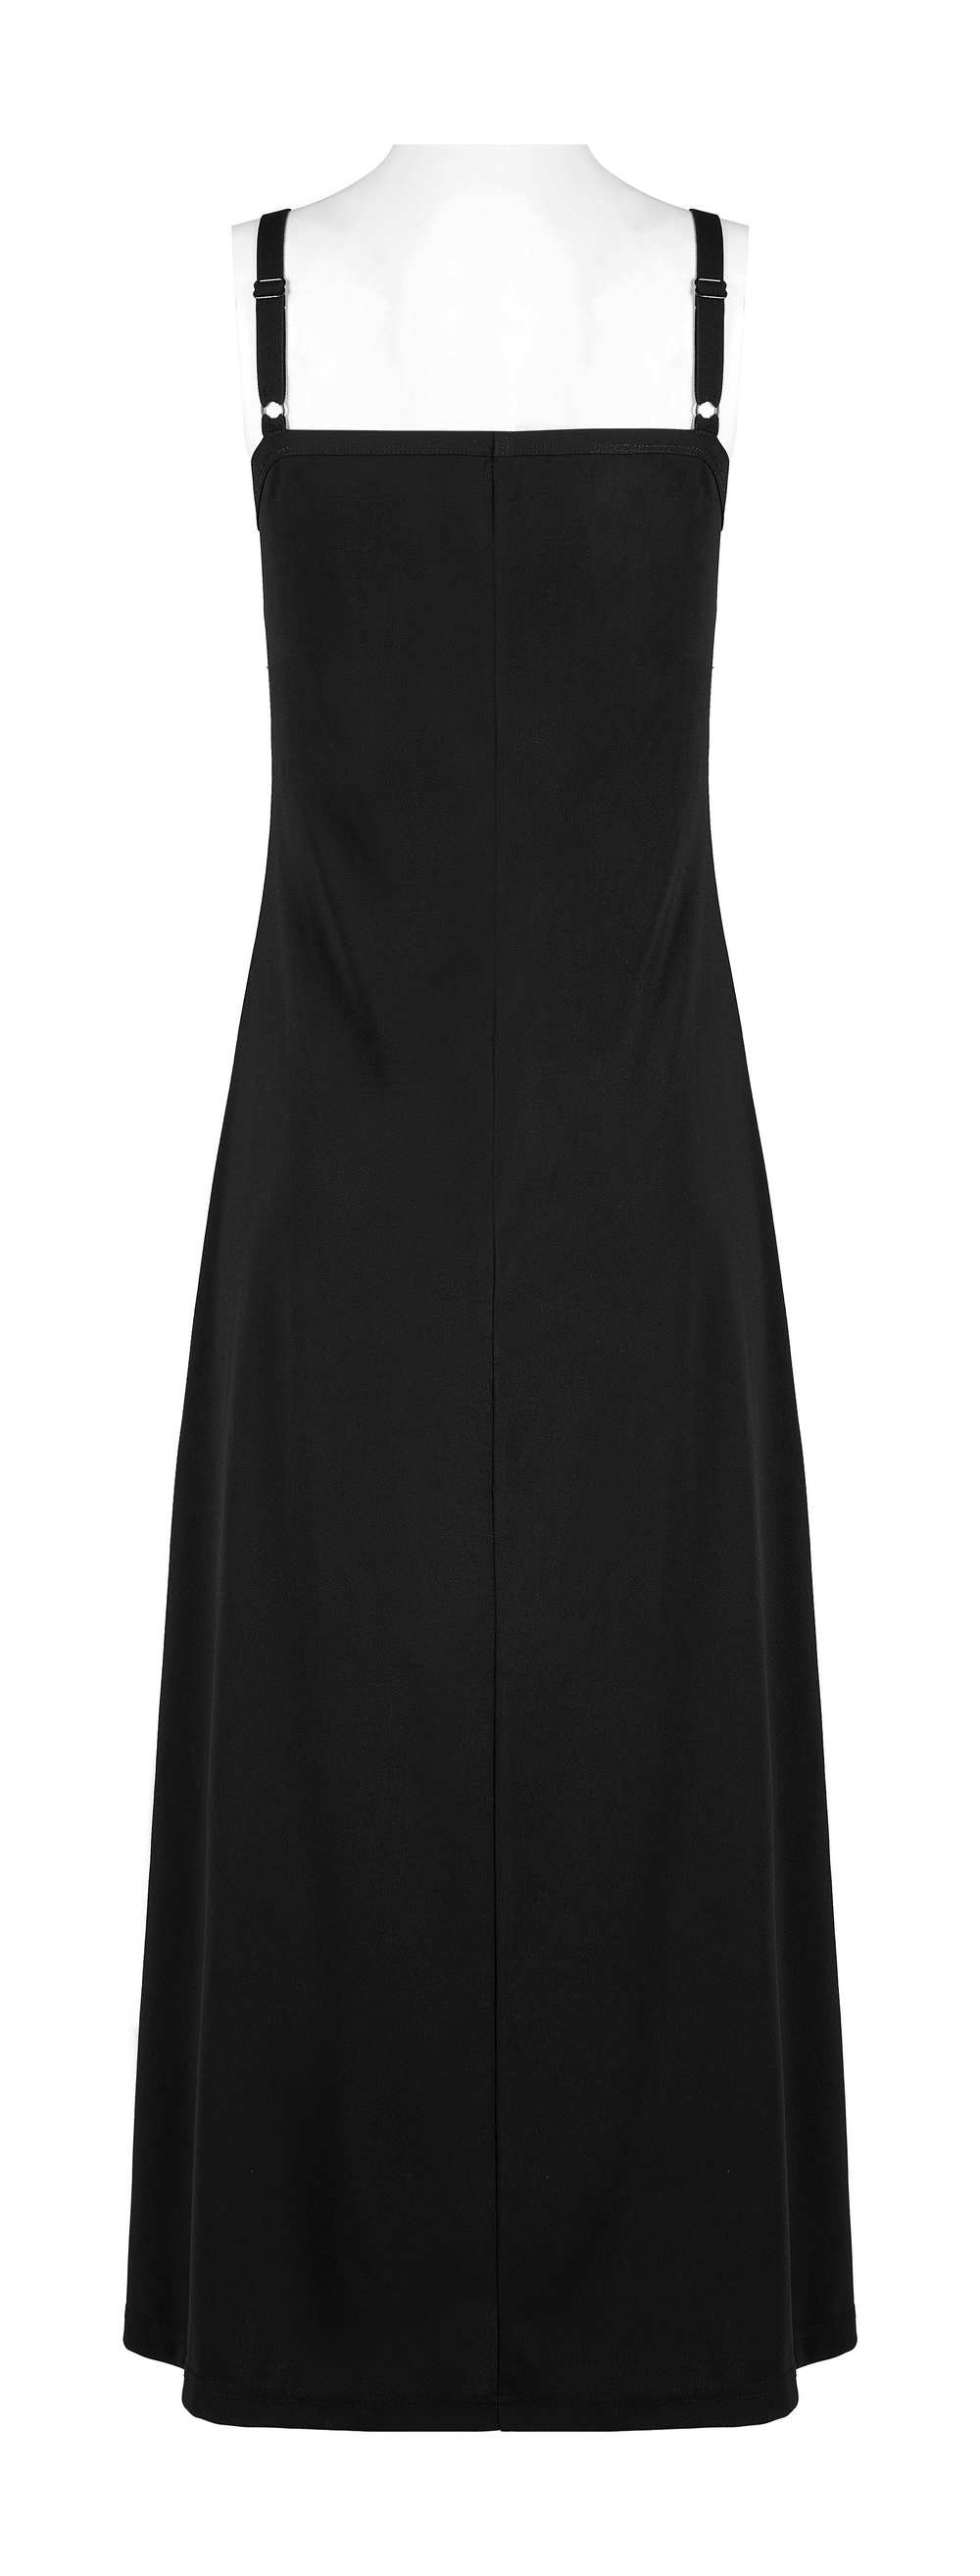 Chic Black Buttoned Maxi Dress with Slit Detail